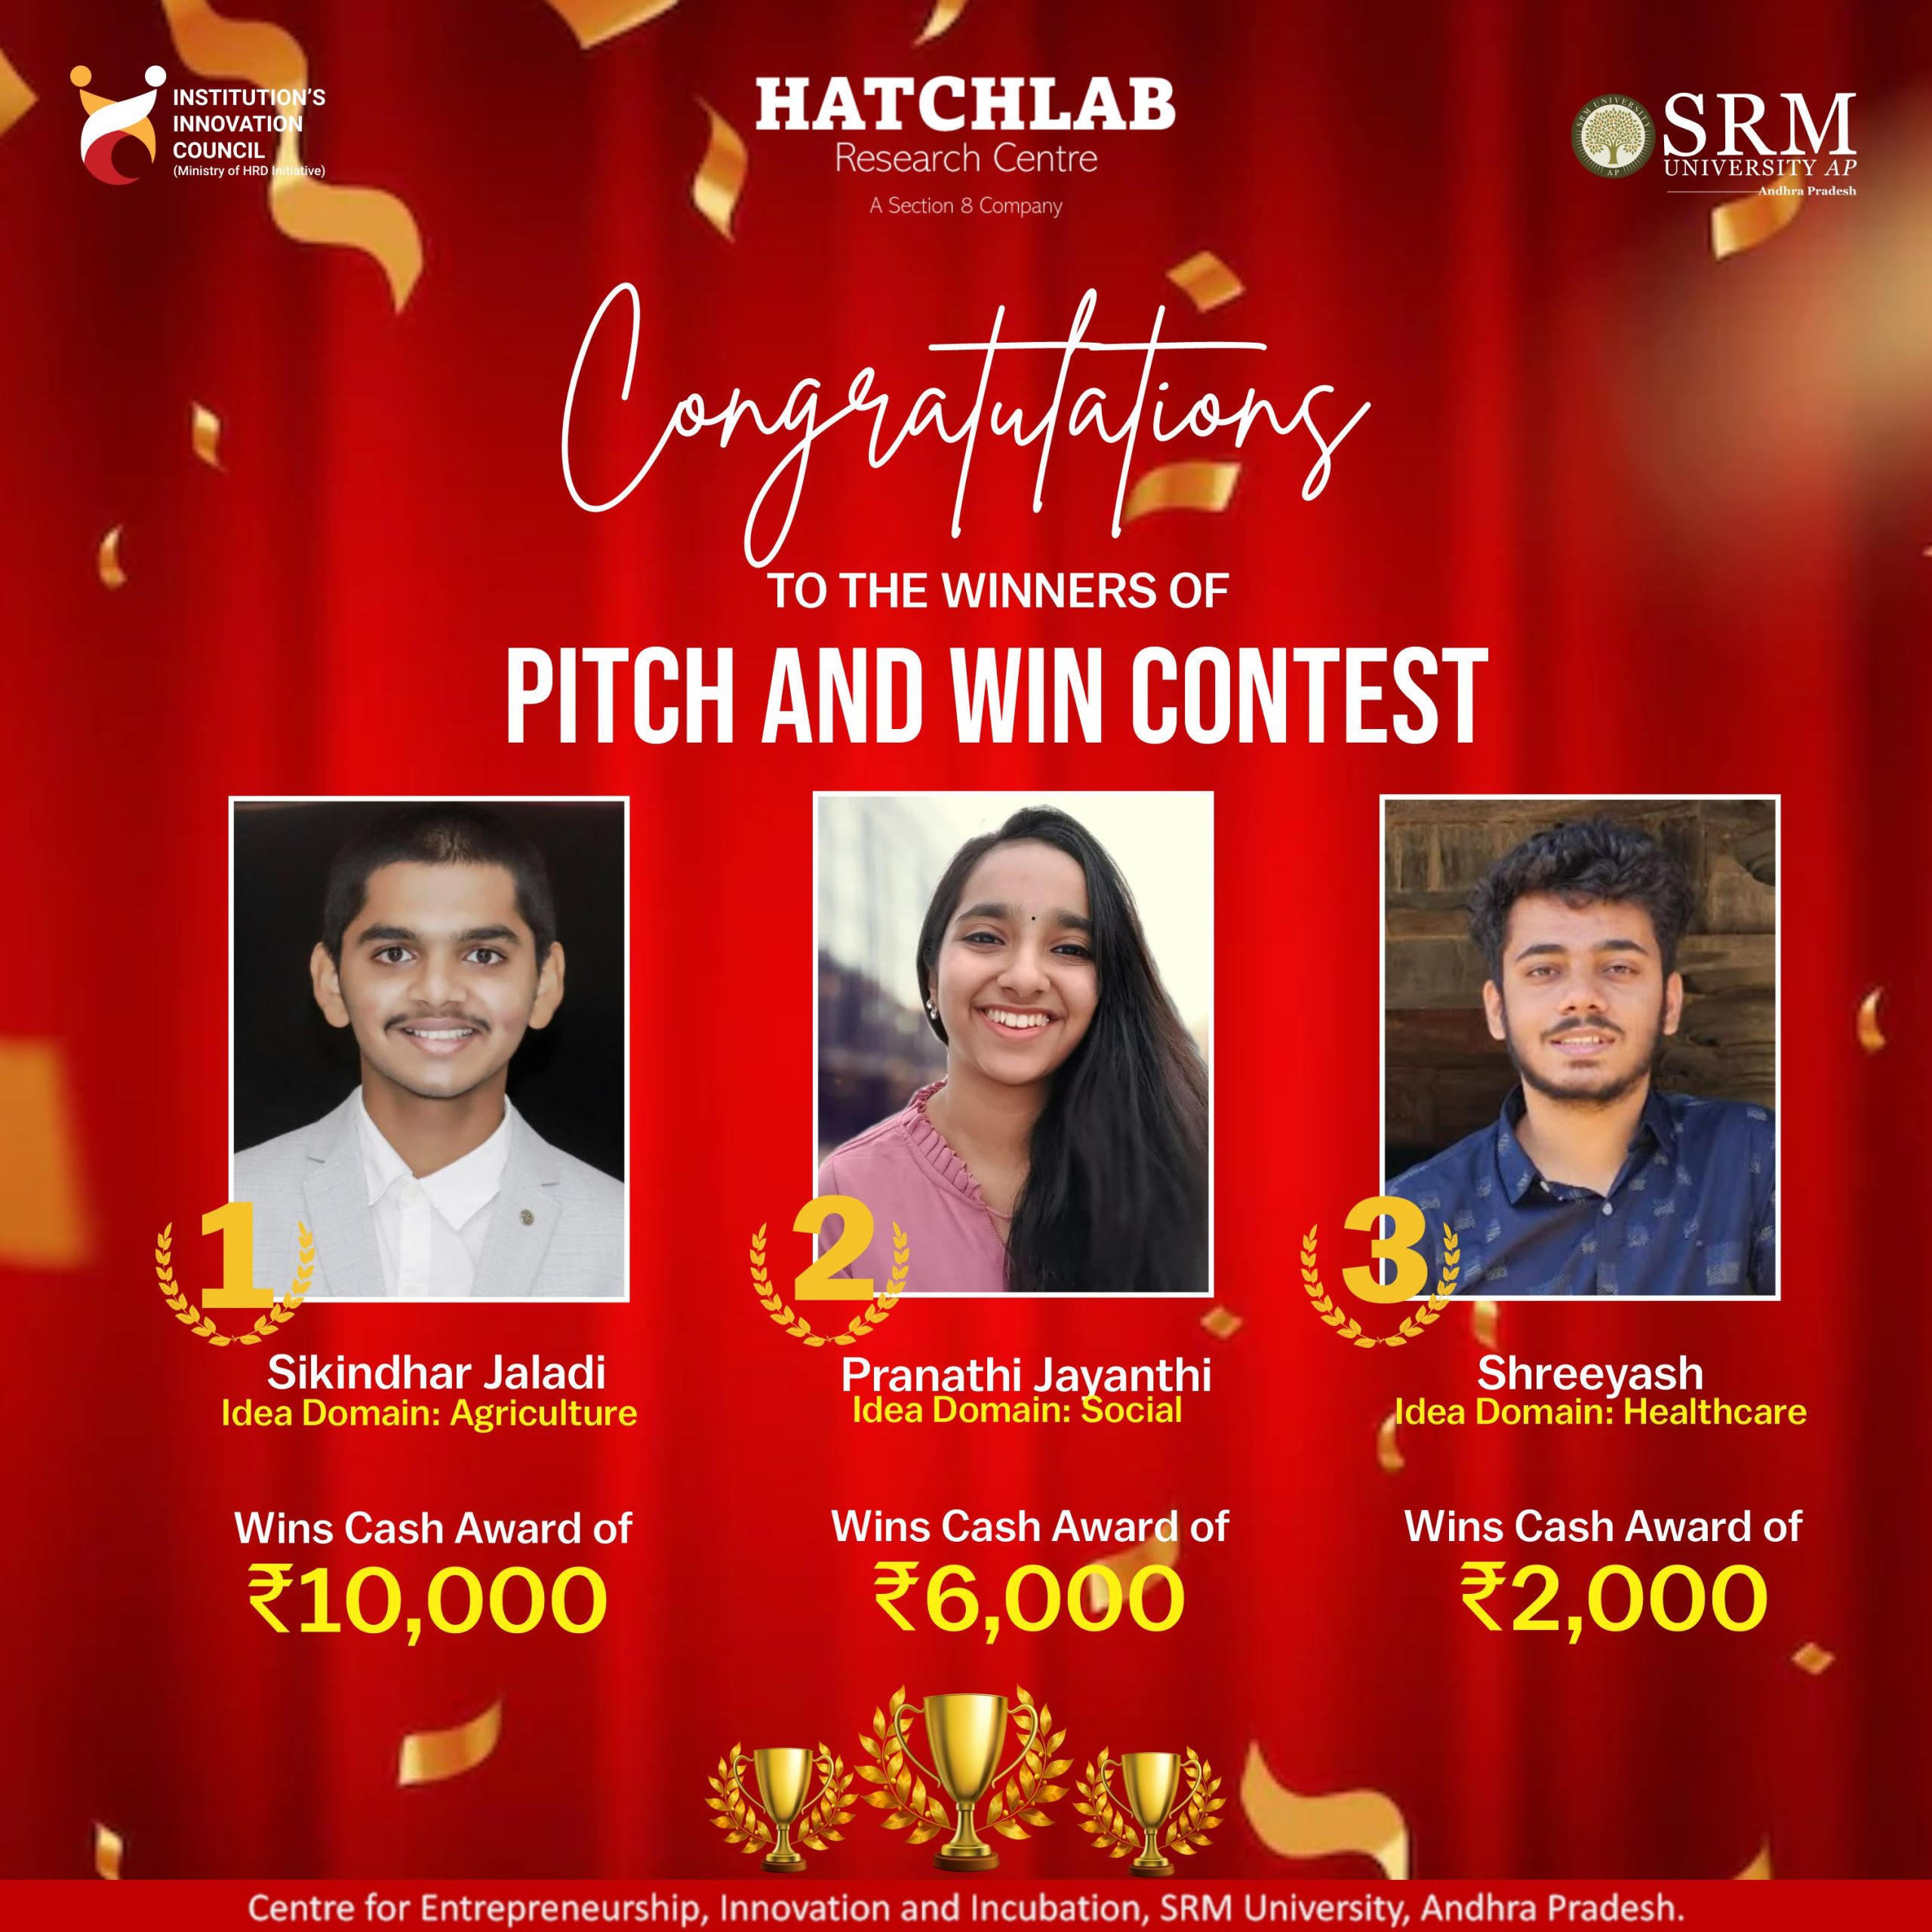 Pitch and win contest